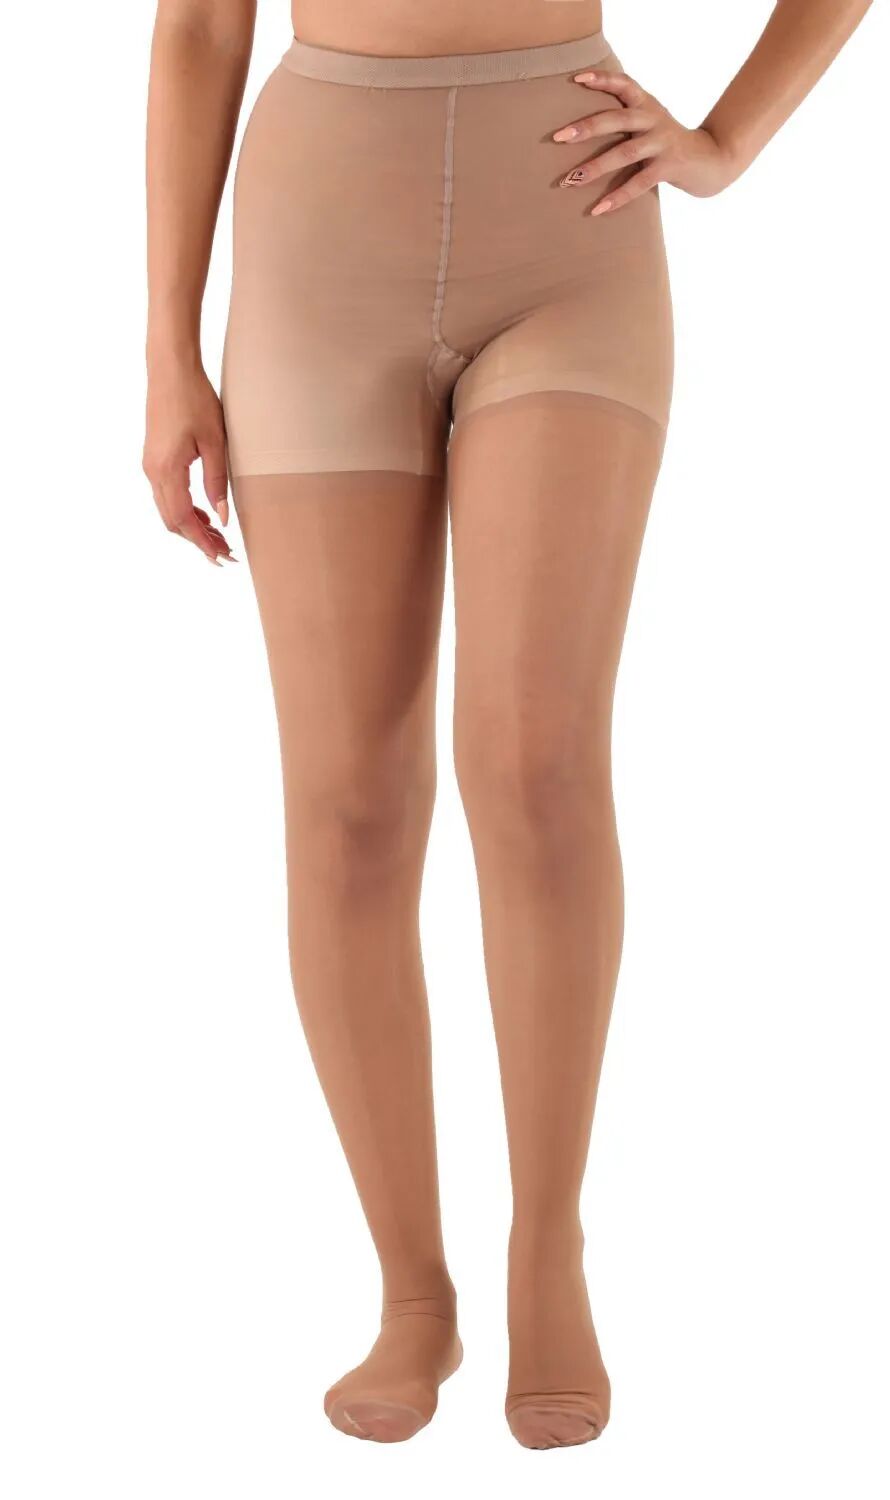 Absolute Support 20-30mmhg Firm Support Beige Queen Plus Closed Toe Women's Sheer Compression Pantyhose - A207BE6